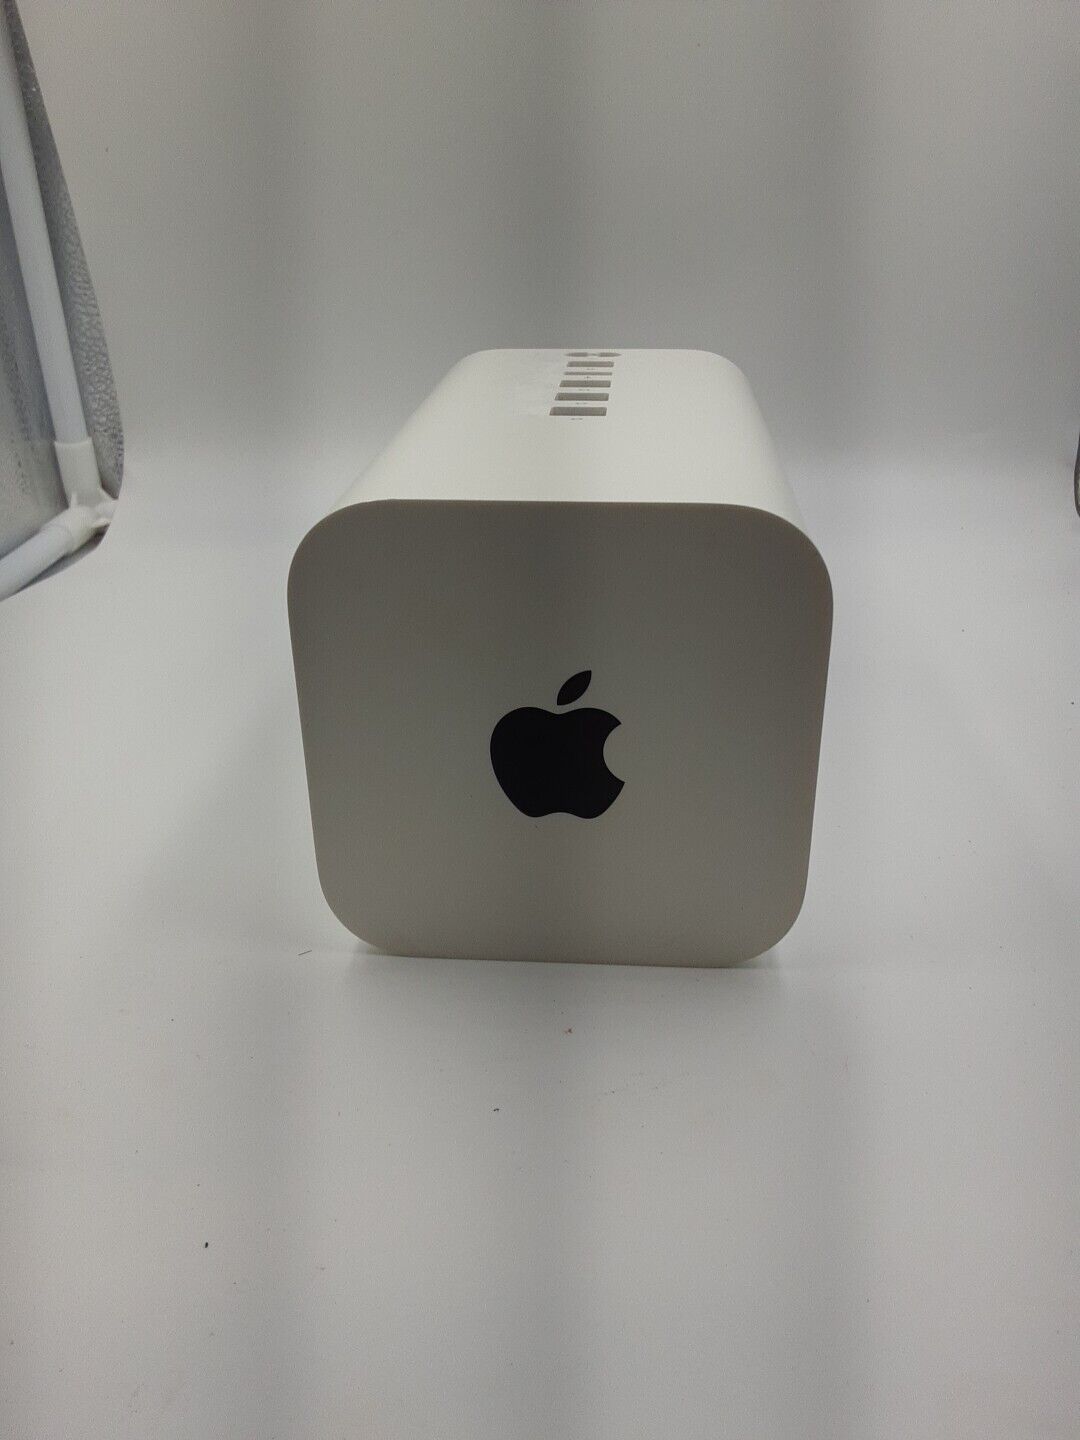 Apple A1521 Airport Extreme Wi-Fi Router